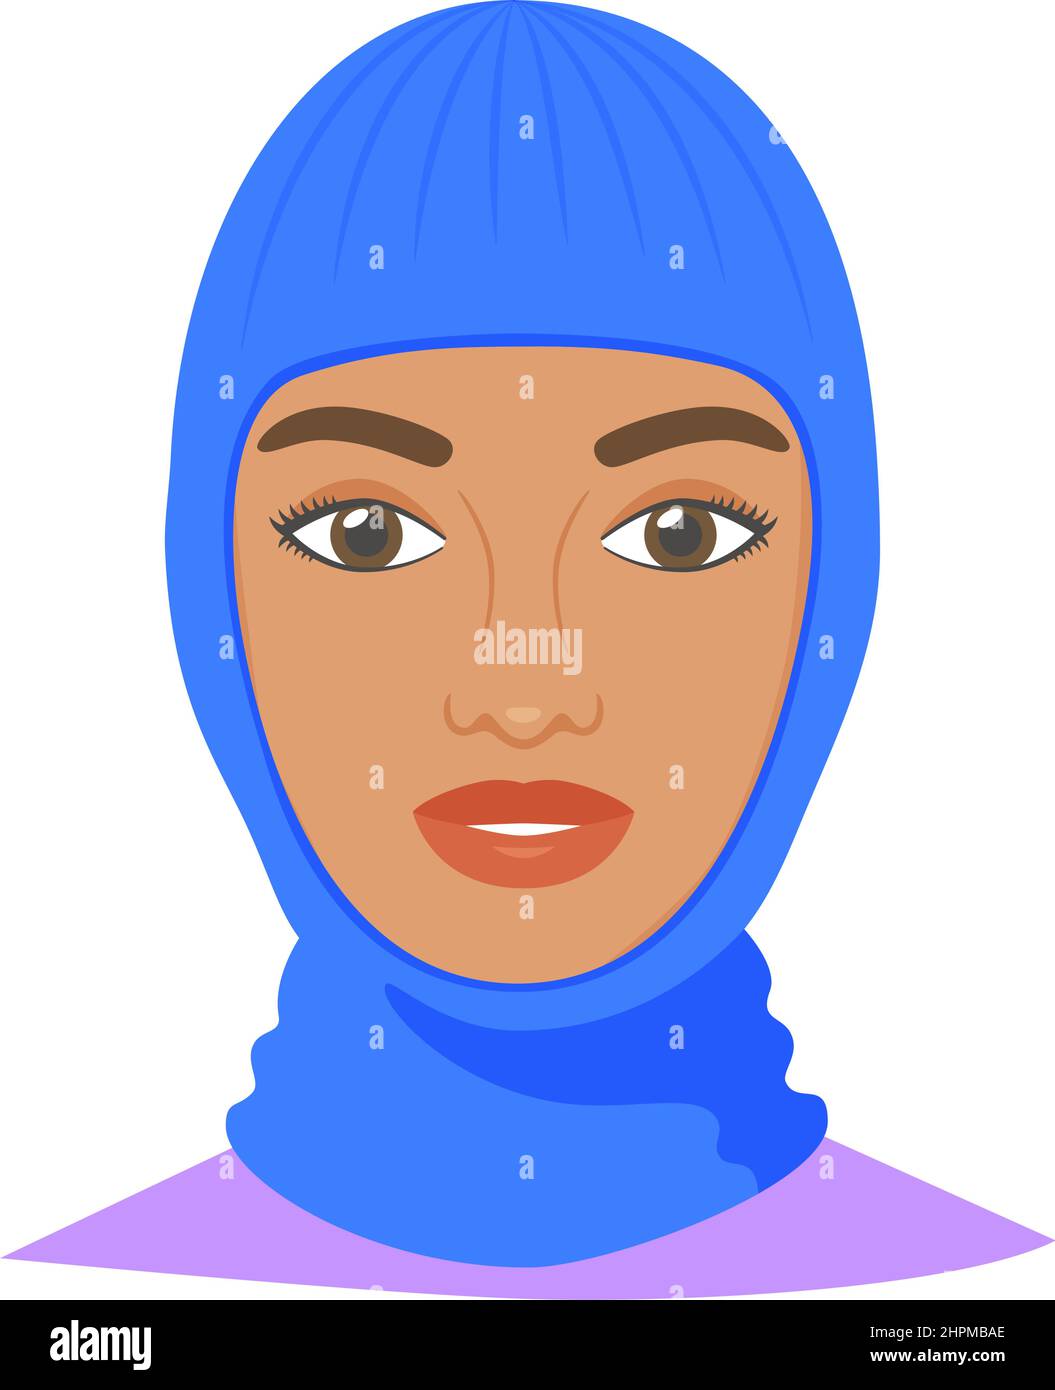 Black woman wearing balaclava helmet. Trendy worm headgear for cold weather. Facial mask for the whole head to wear under helmet in flat style. Vector Stock Vector